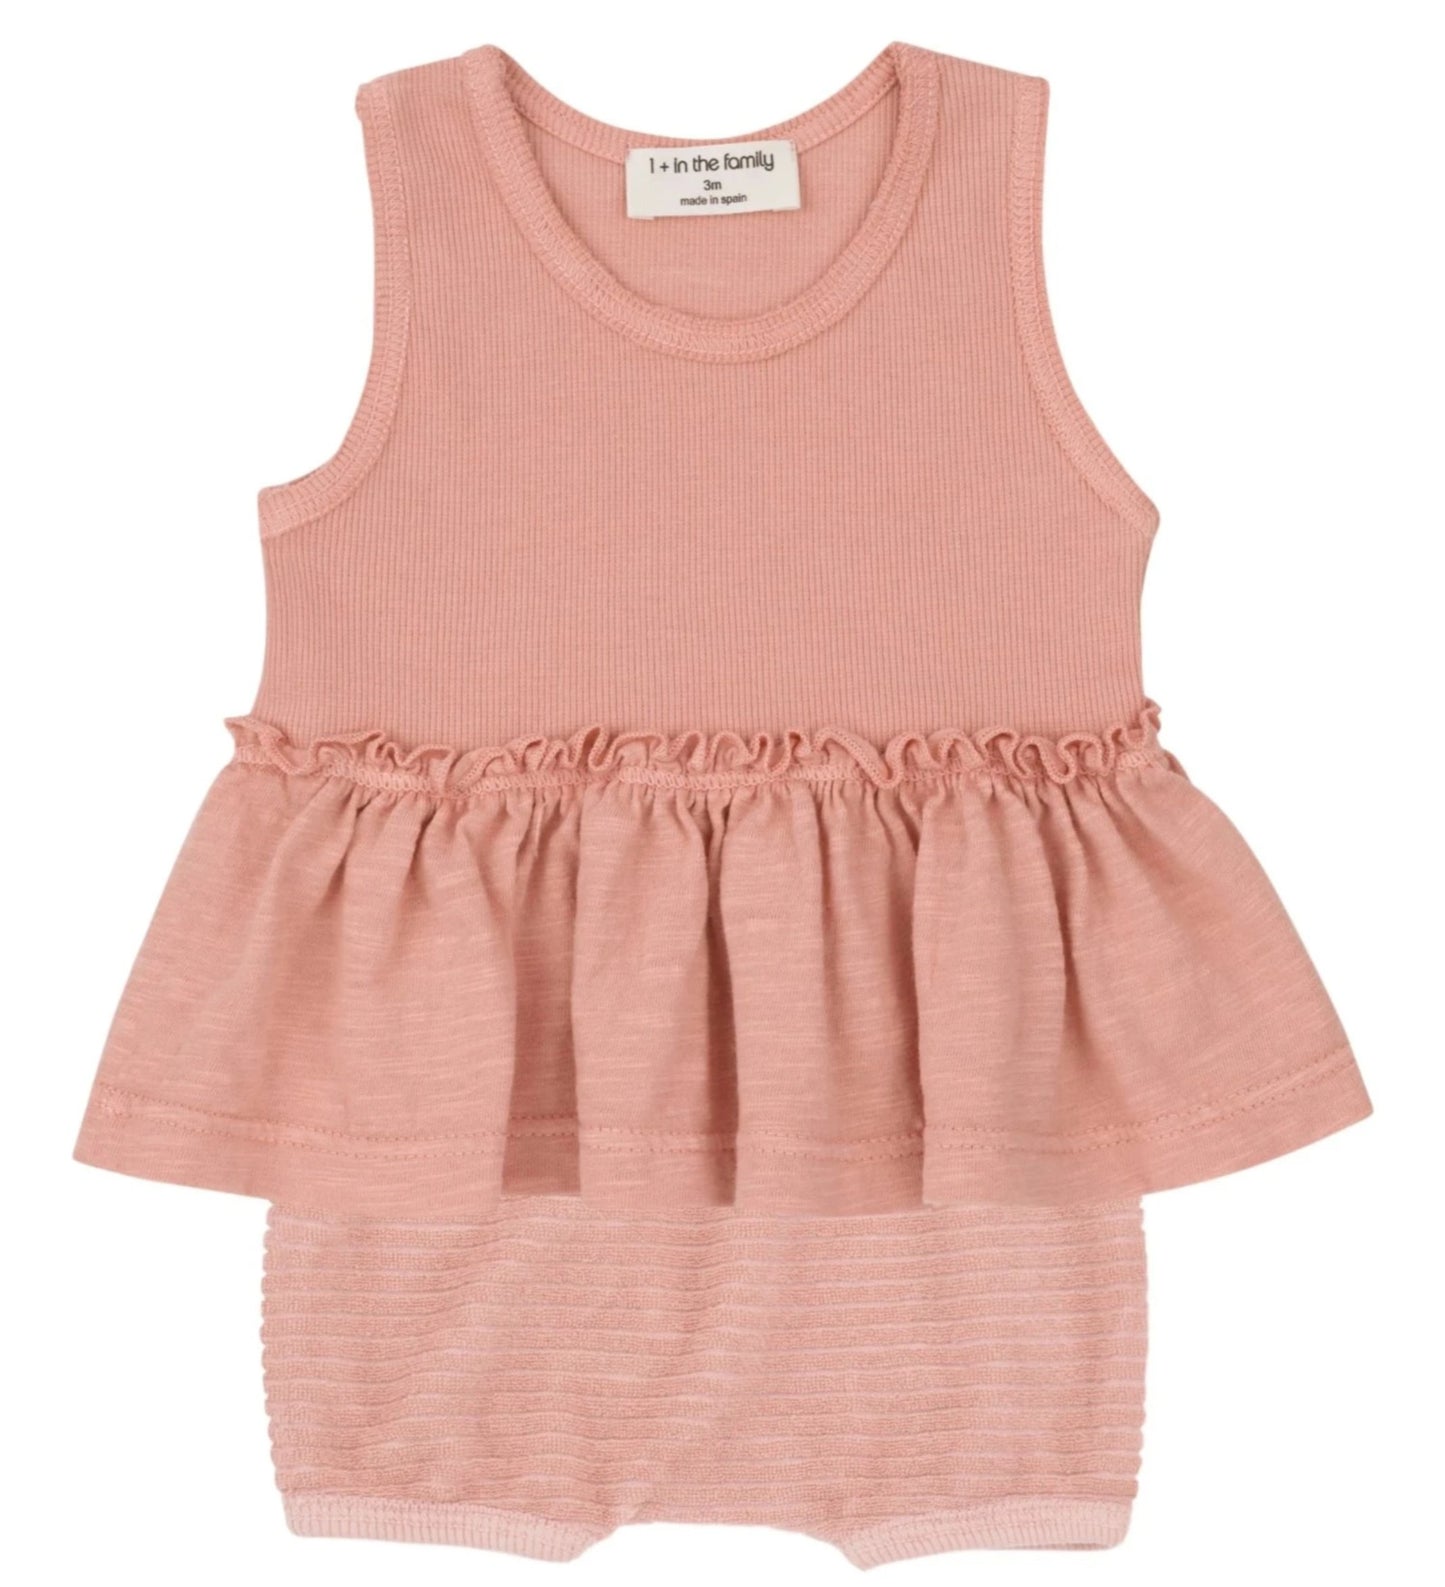 One + In the Family Baby Girl Leuca & Alghero Outfit Set